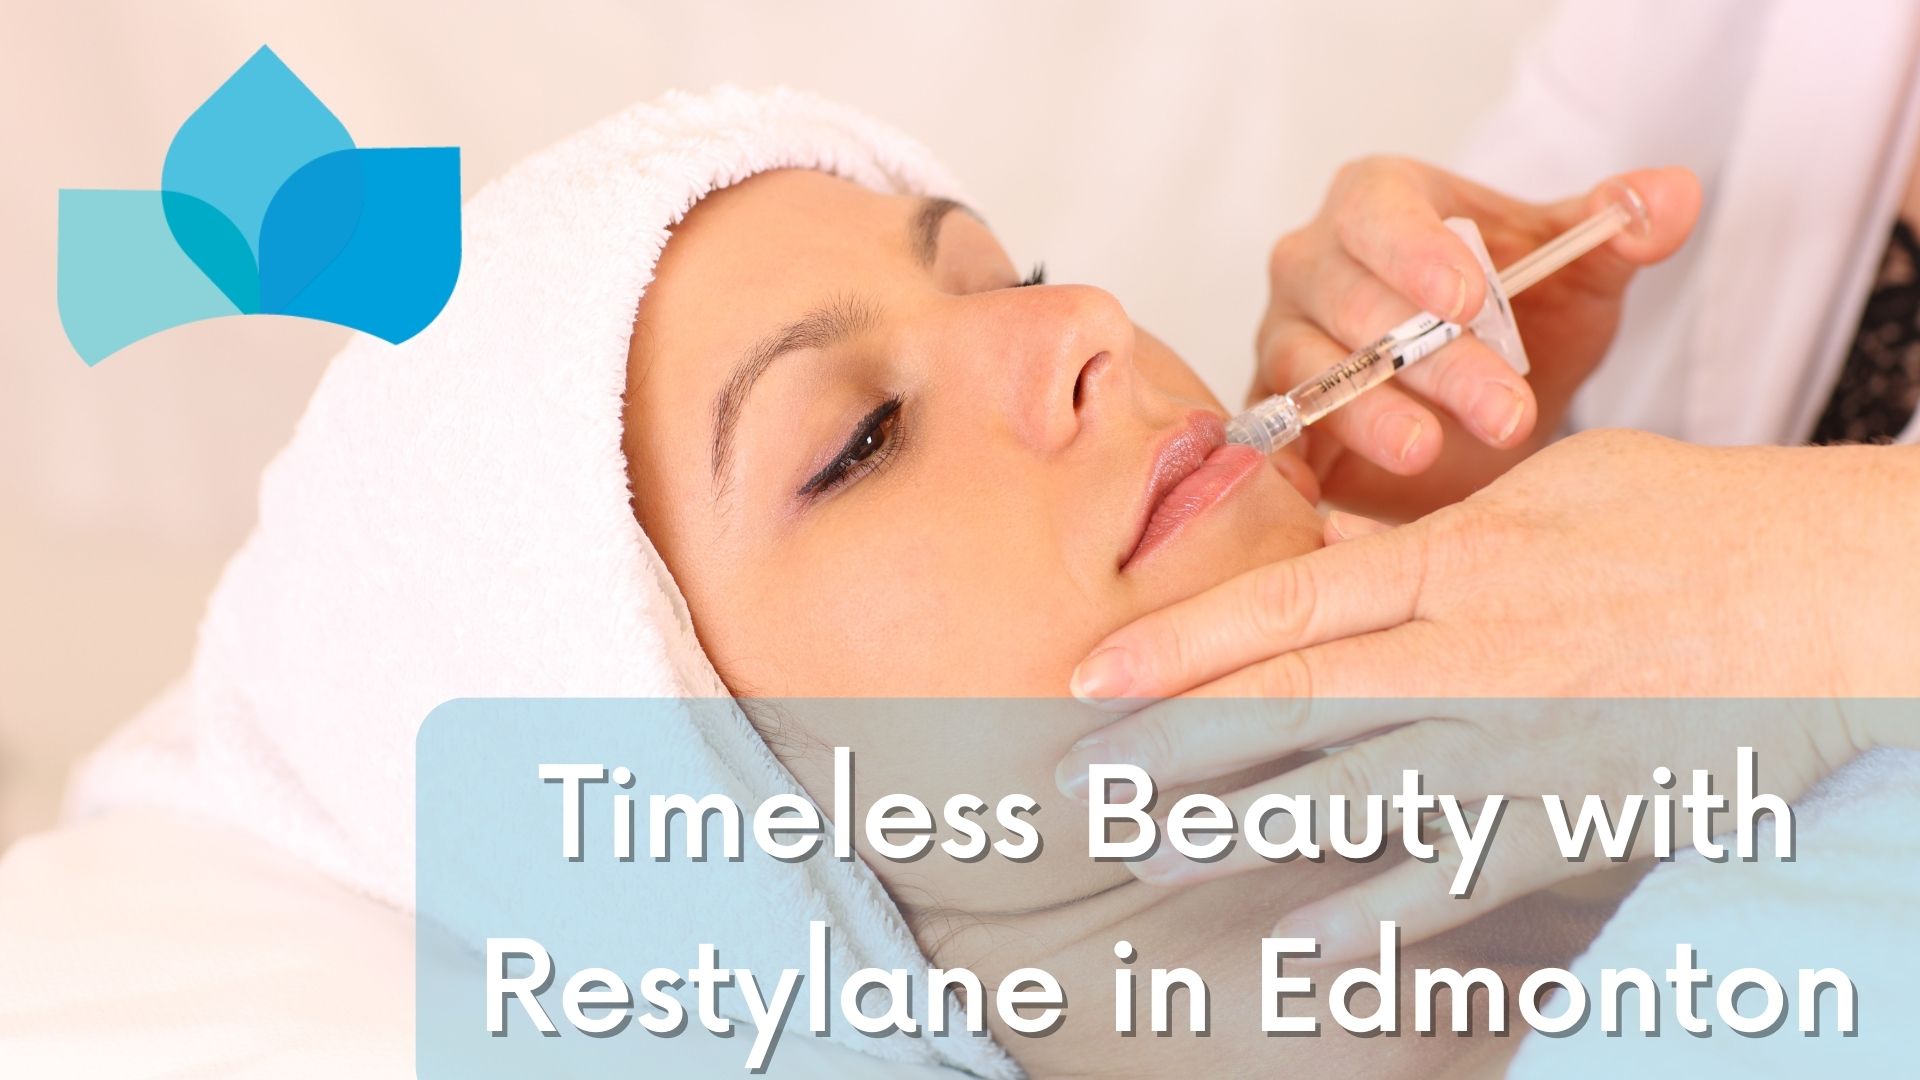 Timeless Beauty with Restylane in Edmonton at Edmonton Dermatology clinic